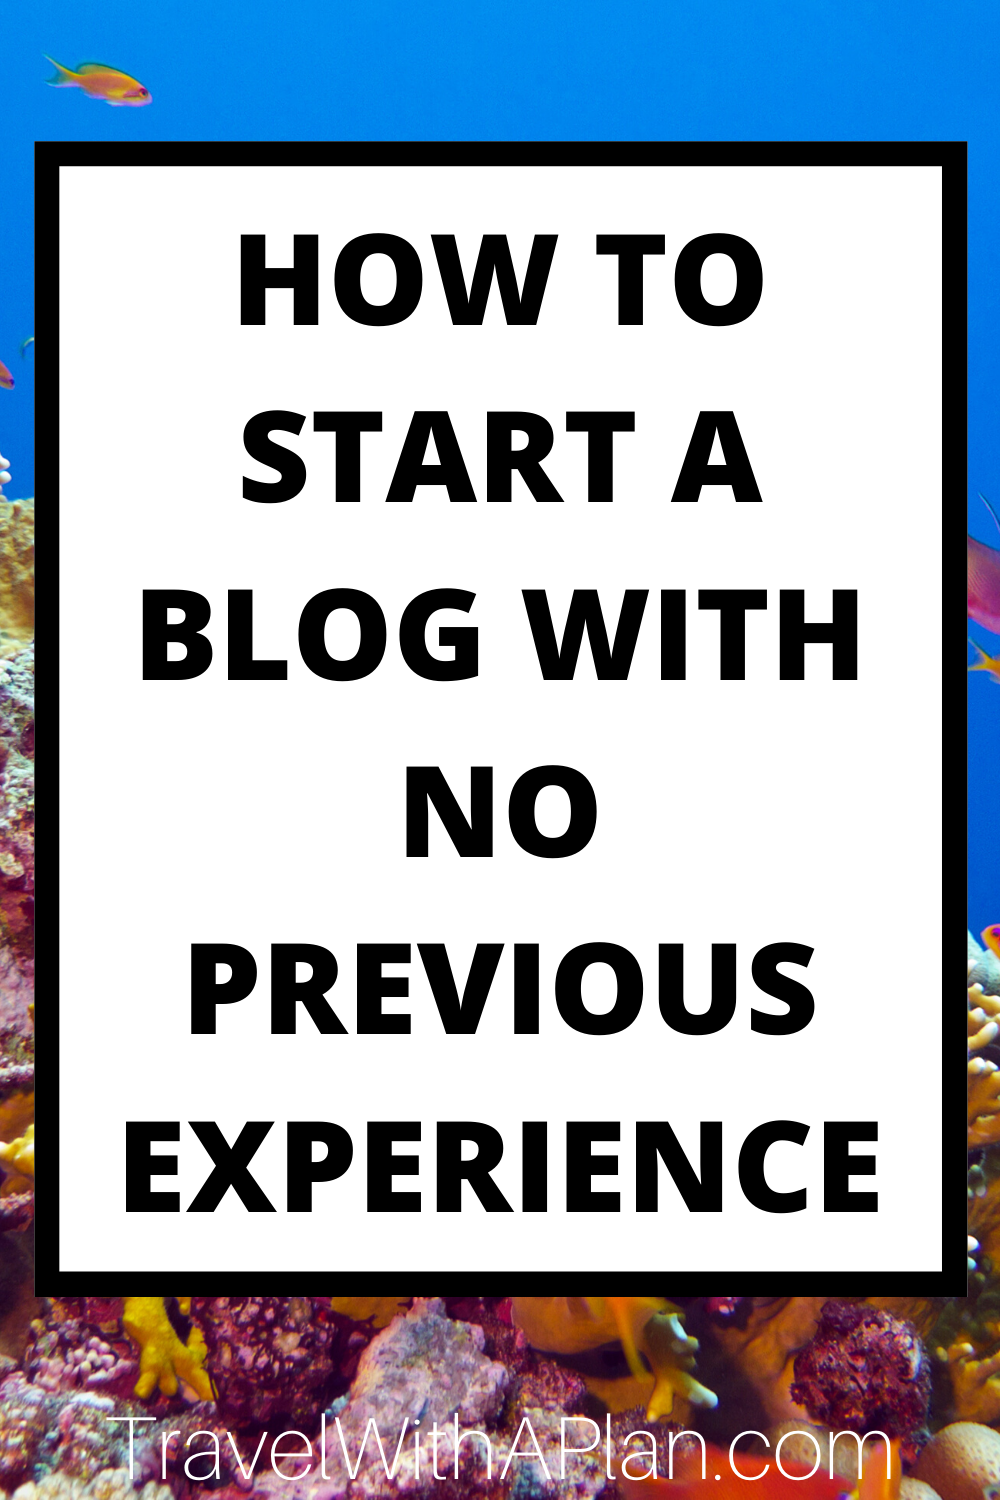 Learn the best new blogger tips from an actual blogger!  I'll give you great tips on how to blog step-by-step as well as move into how to blog and make money.  My simple, free advice is just what you need to start a new blog and fuel your passion to be the best blogger than you can be!  #NewBloggertips #NewBloggerchecklist #Bloggingforbeginners #Howtoblogandmakemoney #Blogincomereport #howtostartablog